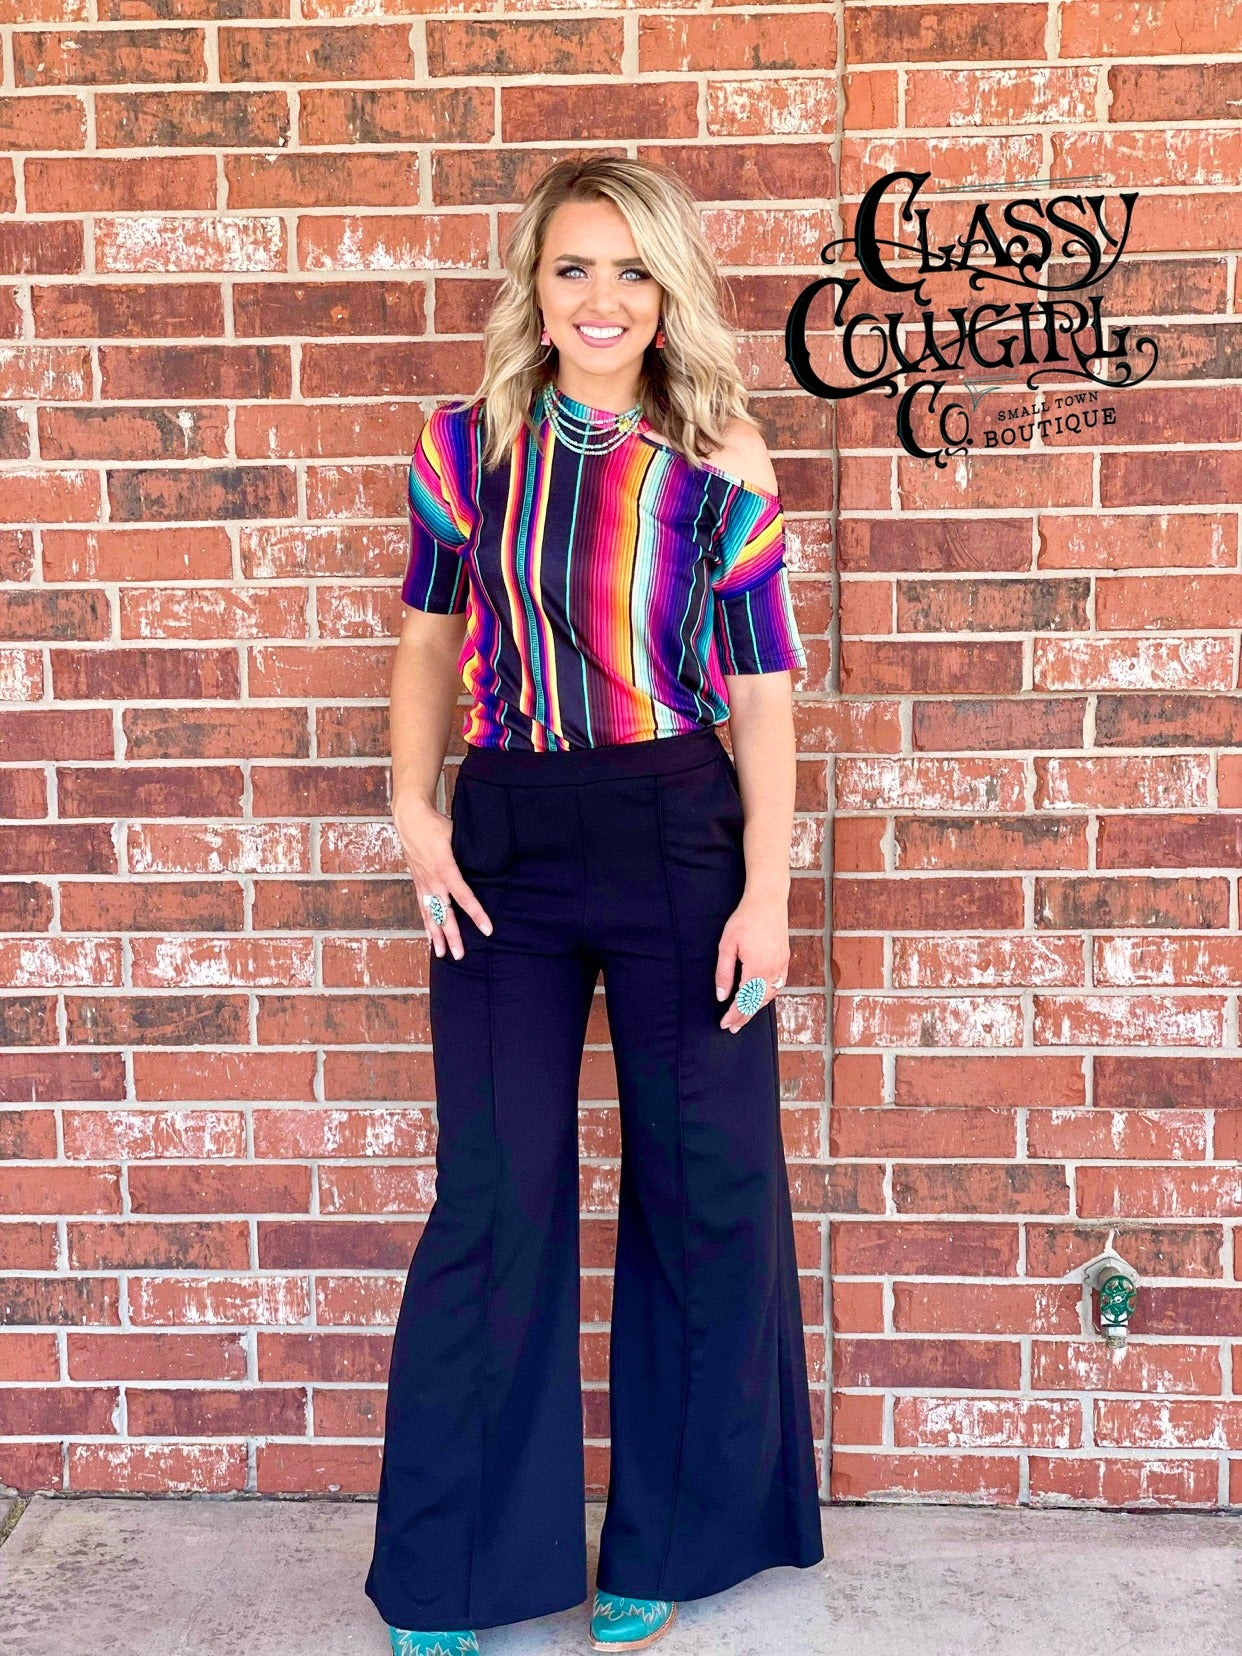 Pants - Flares/Wide Leg/Bells – Classy Cowgirl Co.